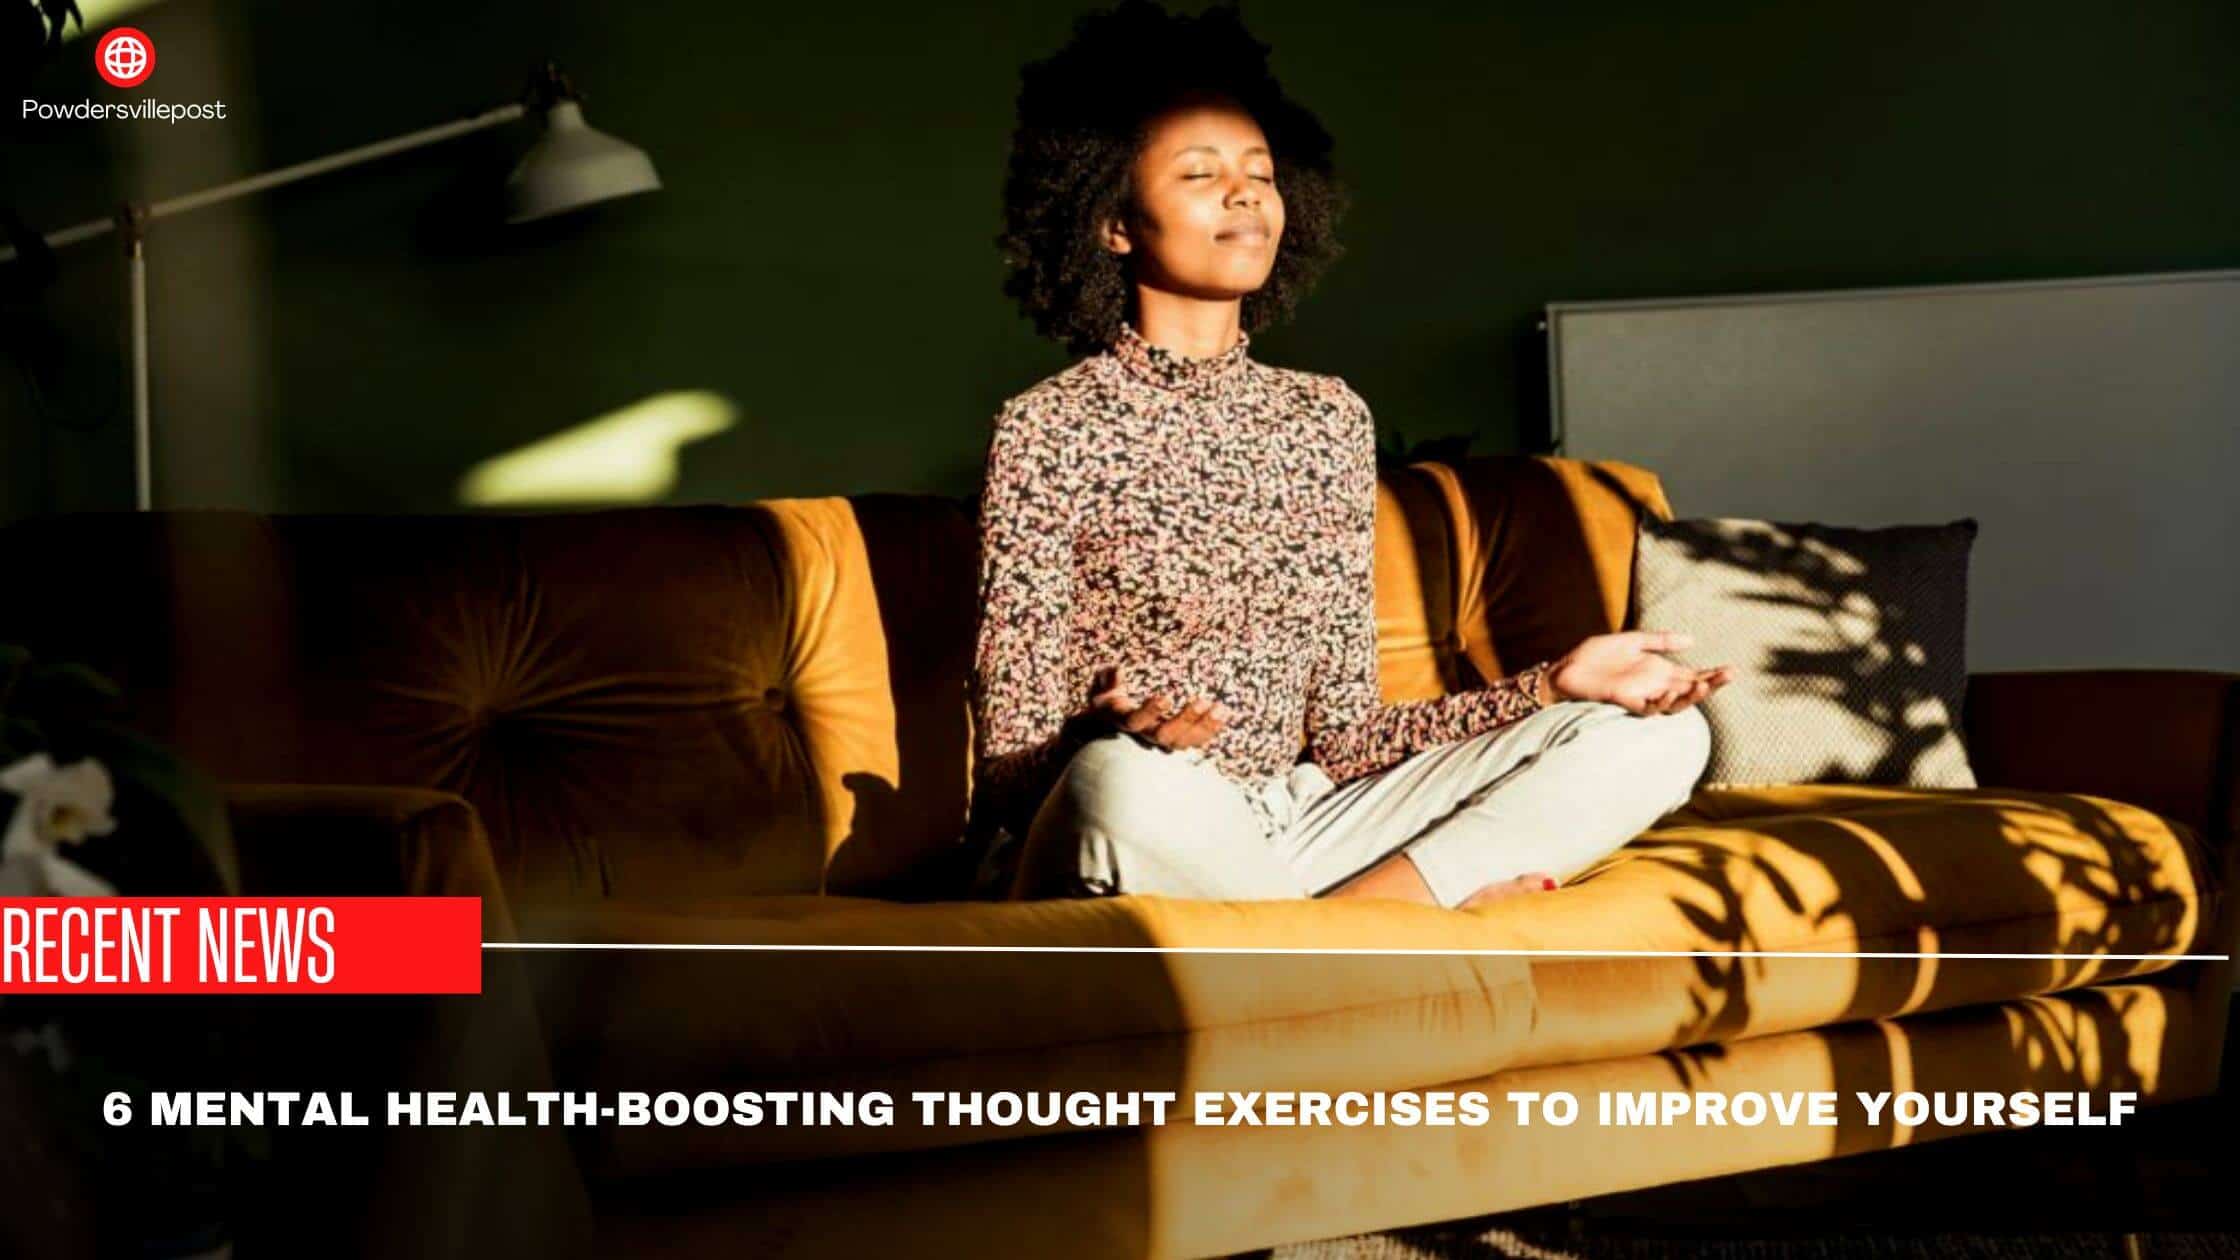 6 Mental Health-Boosting Thought Exercises To Improve Yourself